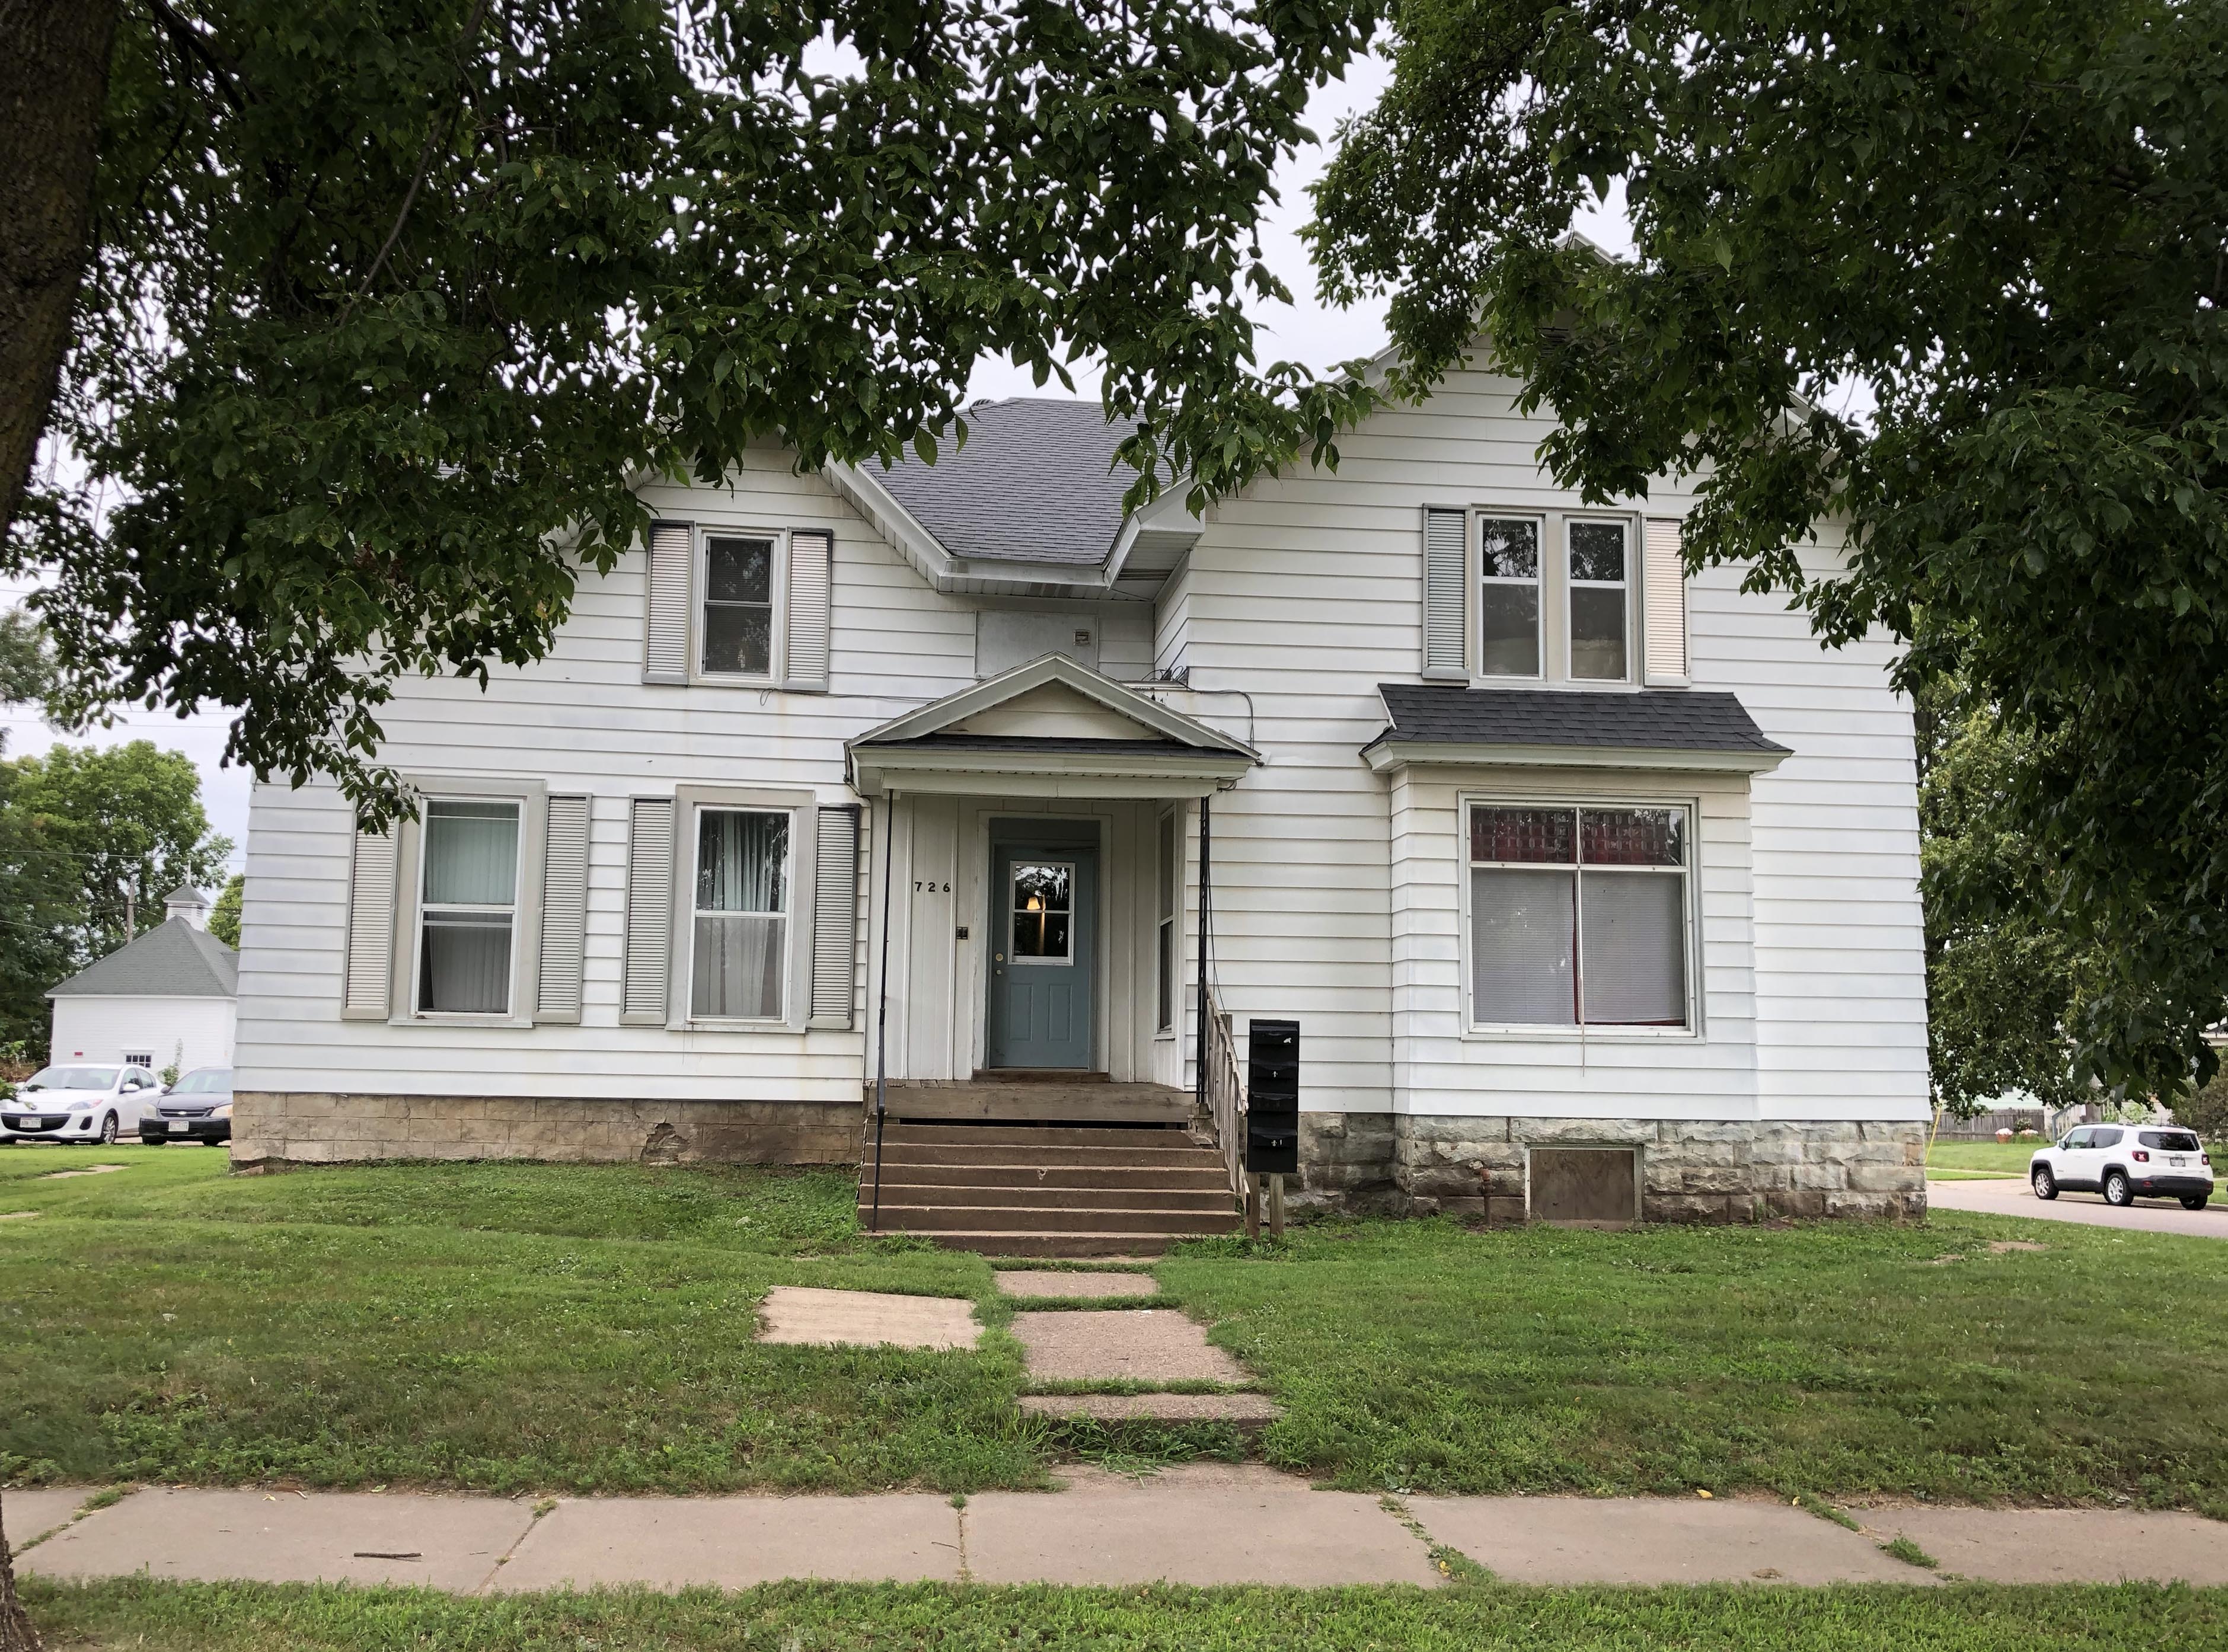 716 5th Ave, Eau Claire, Wisconsin 54703, 1 Bedroom Bedrooms, ,1 BathroomBathrooms,Multi-Family,Apartment,716 5th Ave ,1147